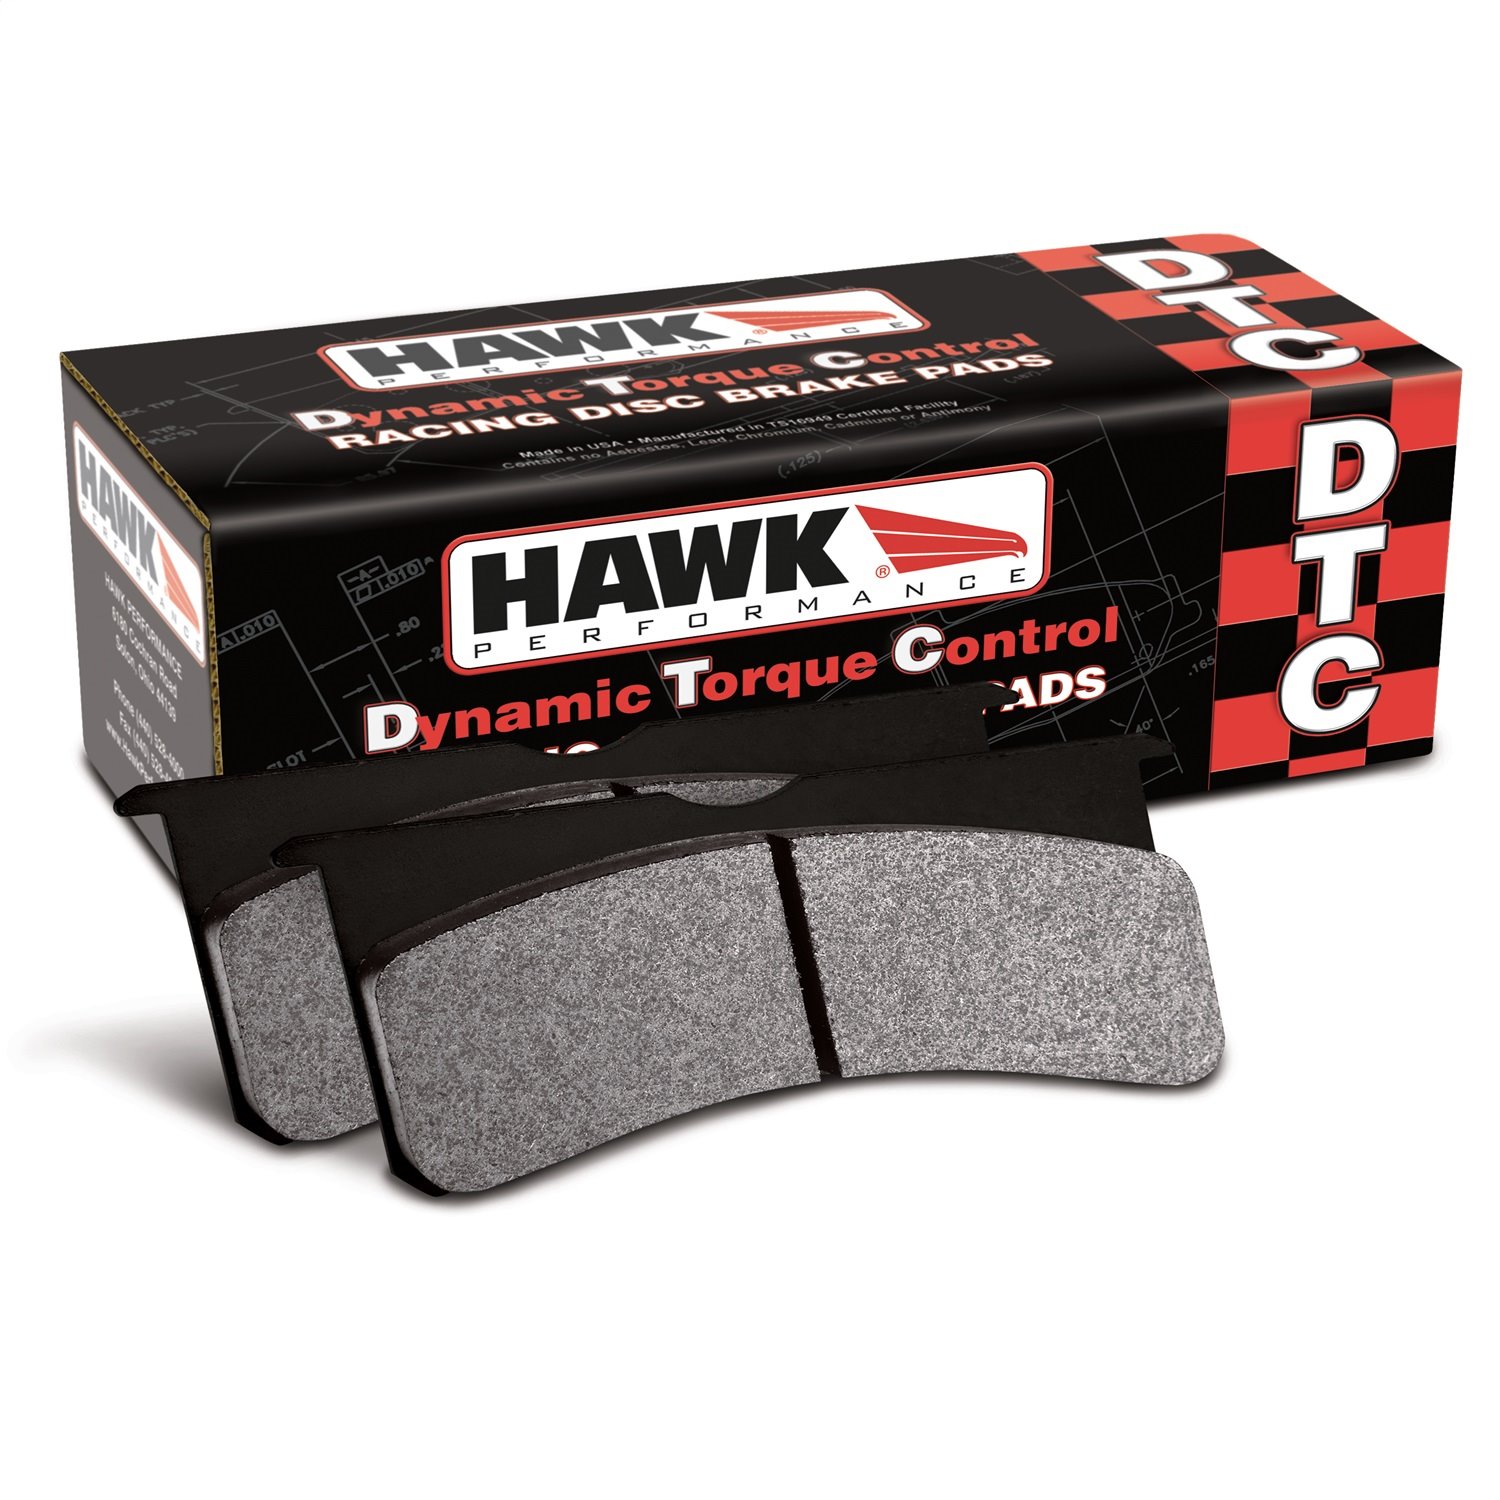 DTC-80 BRAKE PADS BMW Front